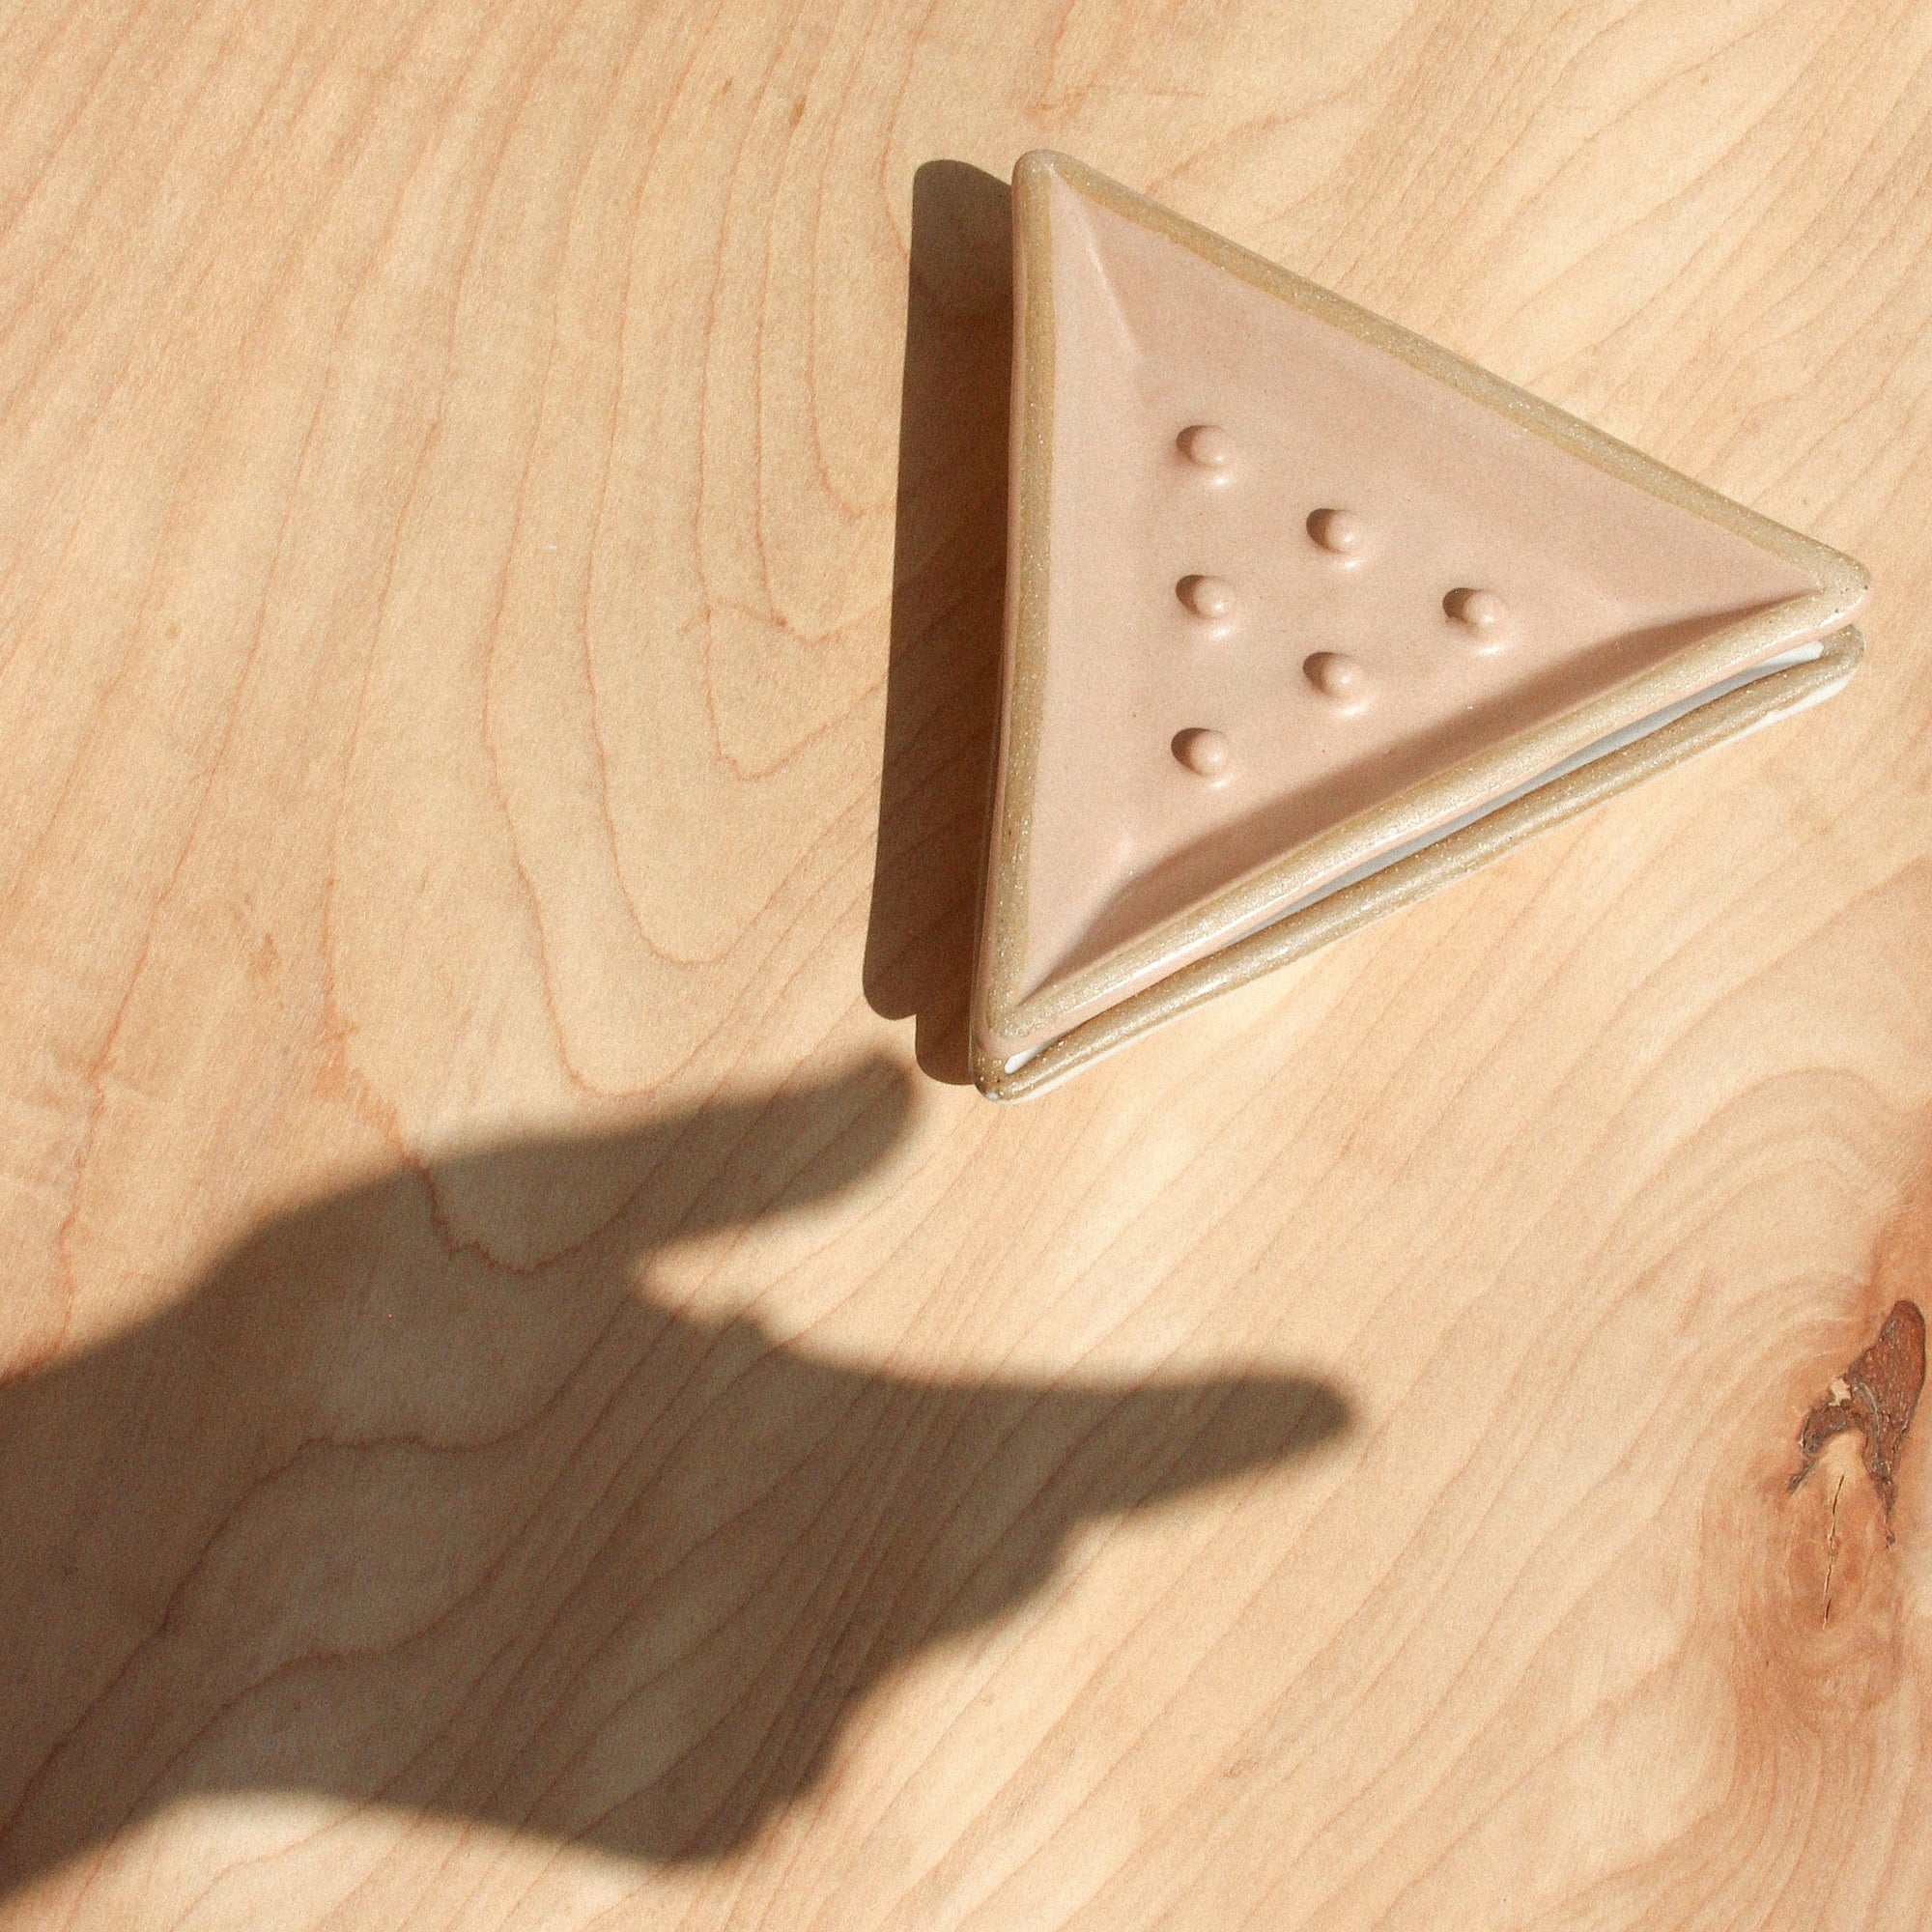 Two triangular ceramic soap dishes and a shadow hand against wood grain